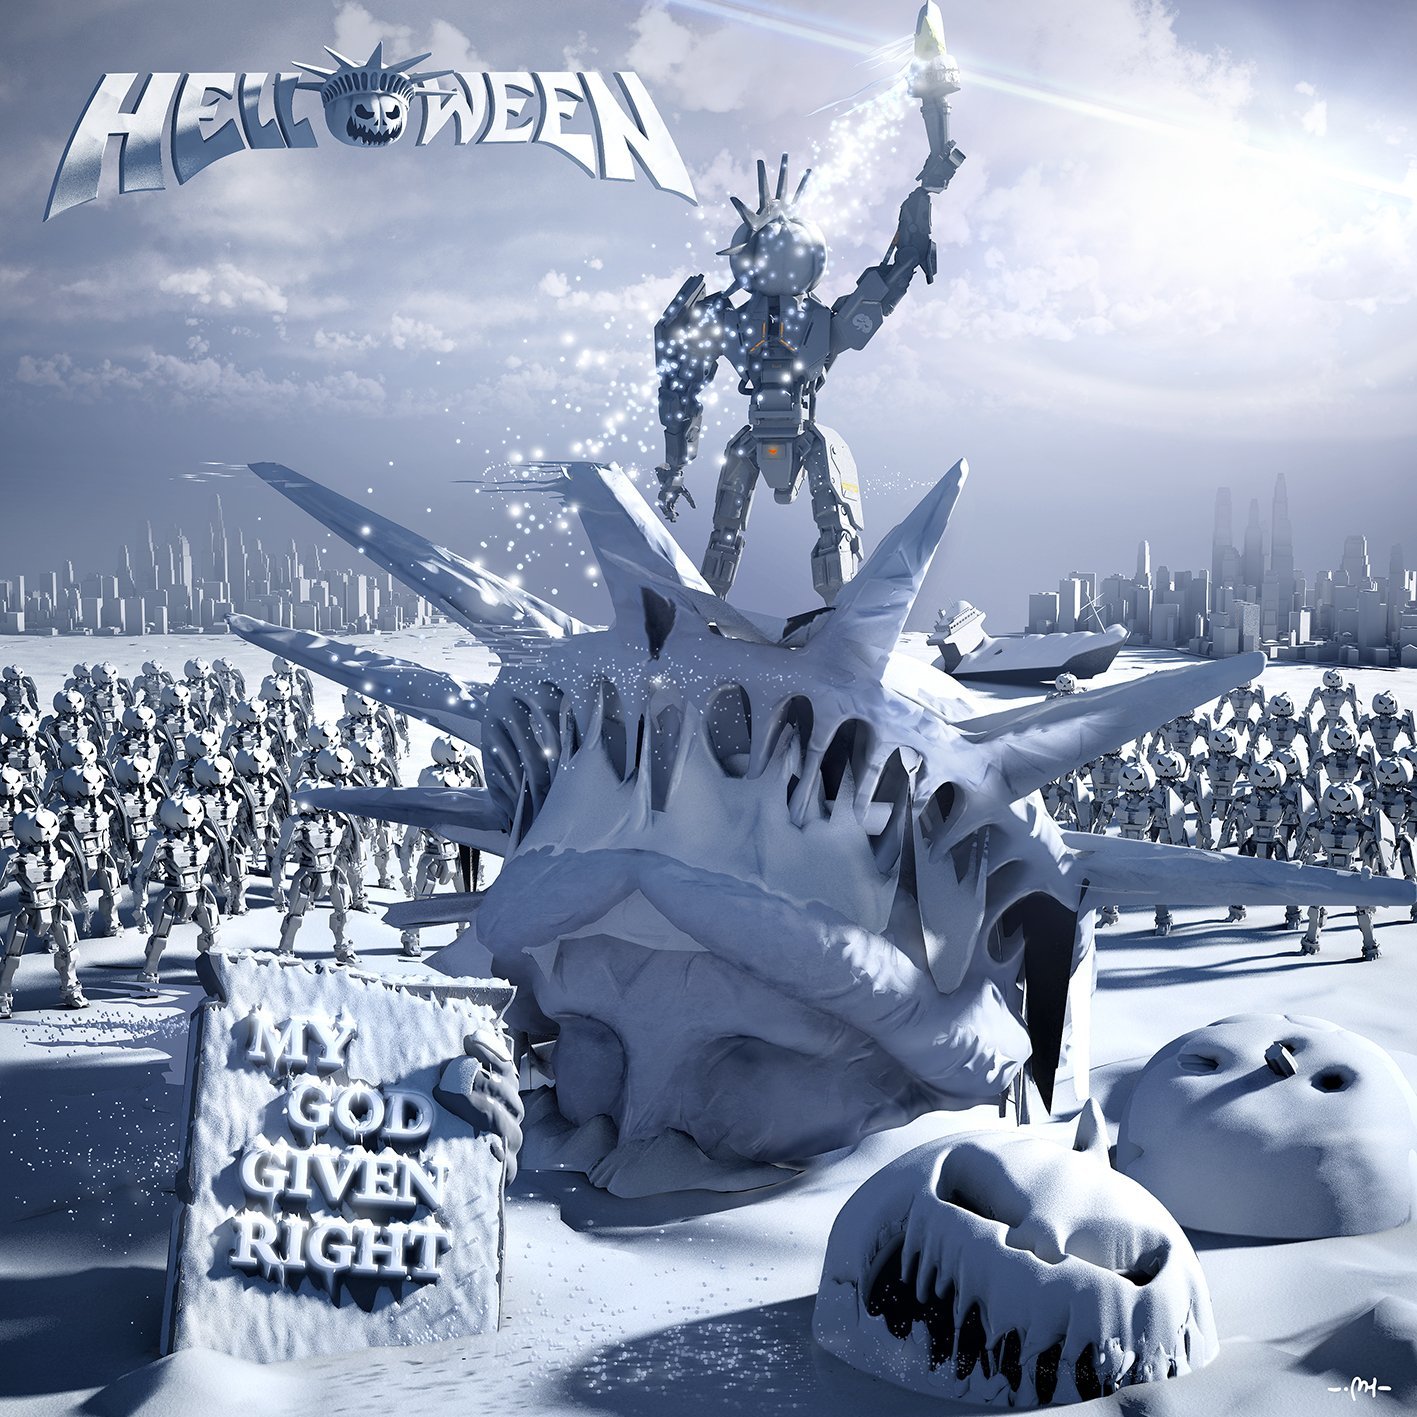 Helloween: My God-Given Right (2015) Book Cover